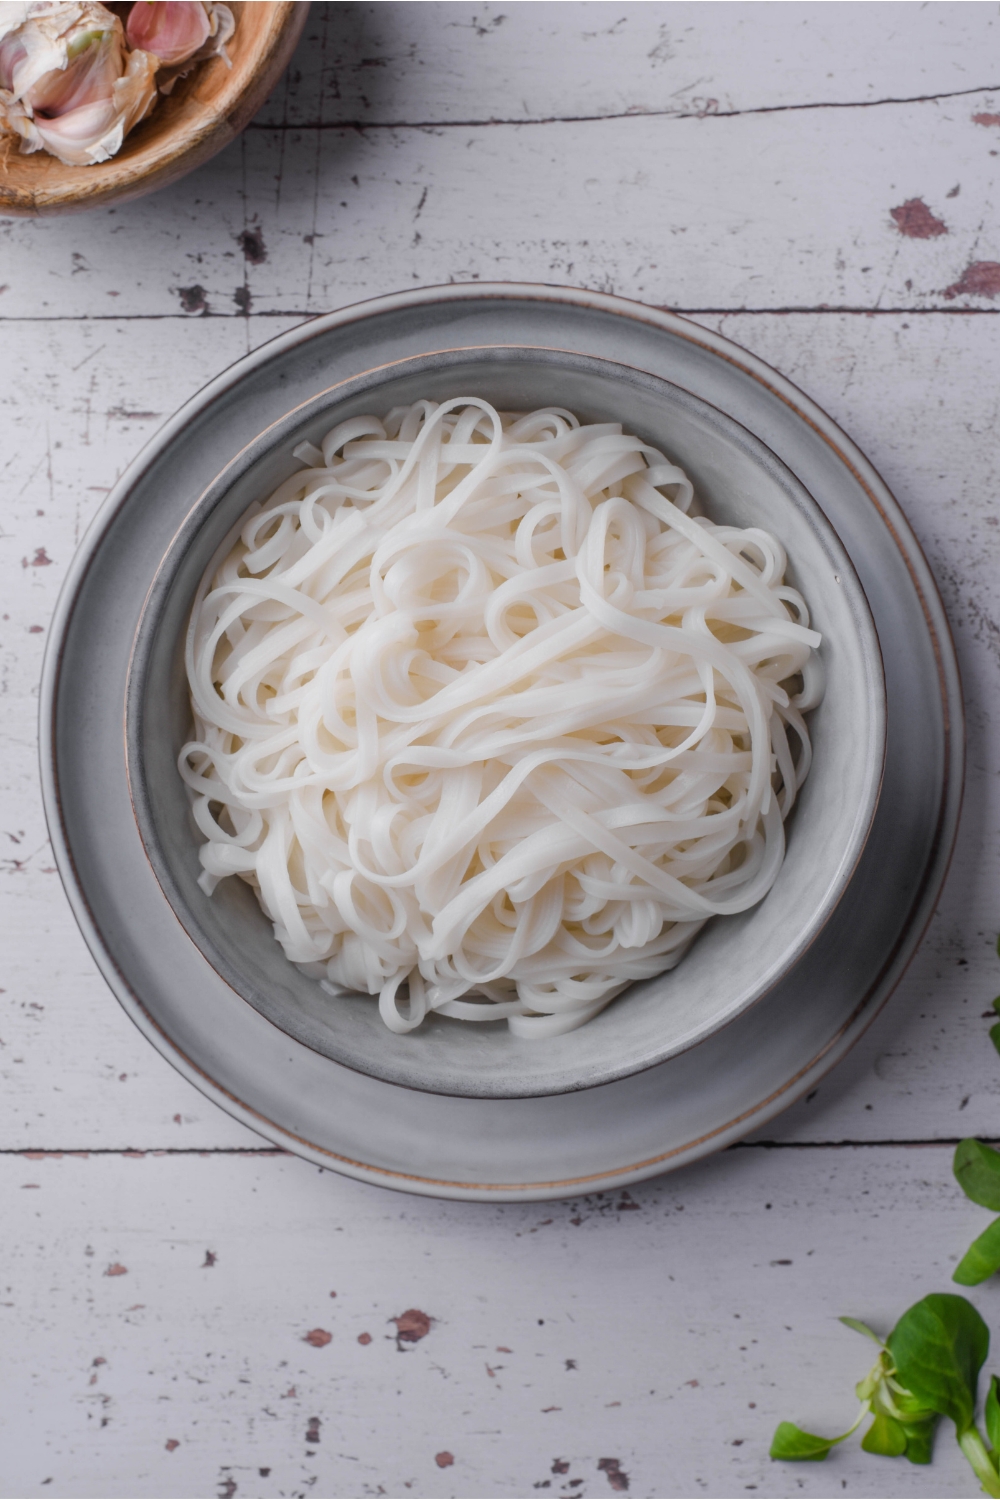 Overhead view of a bowl filled with cooked rice noodles.